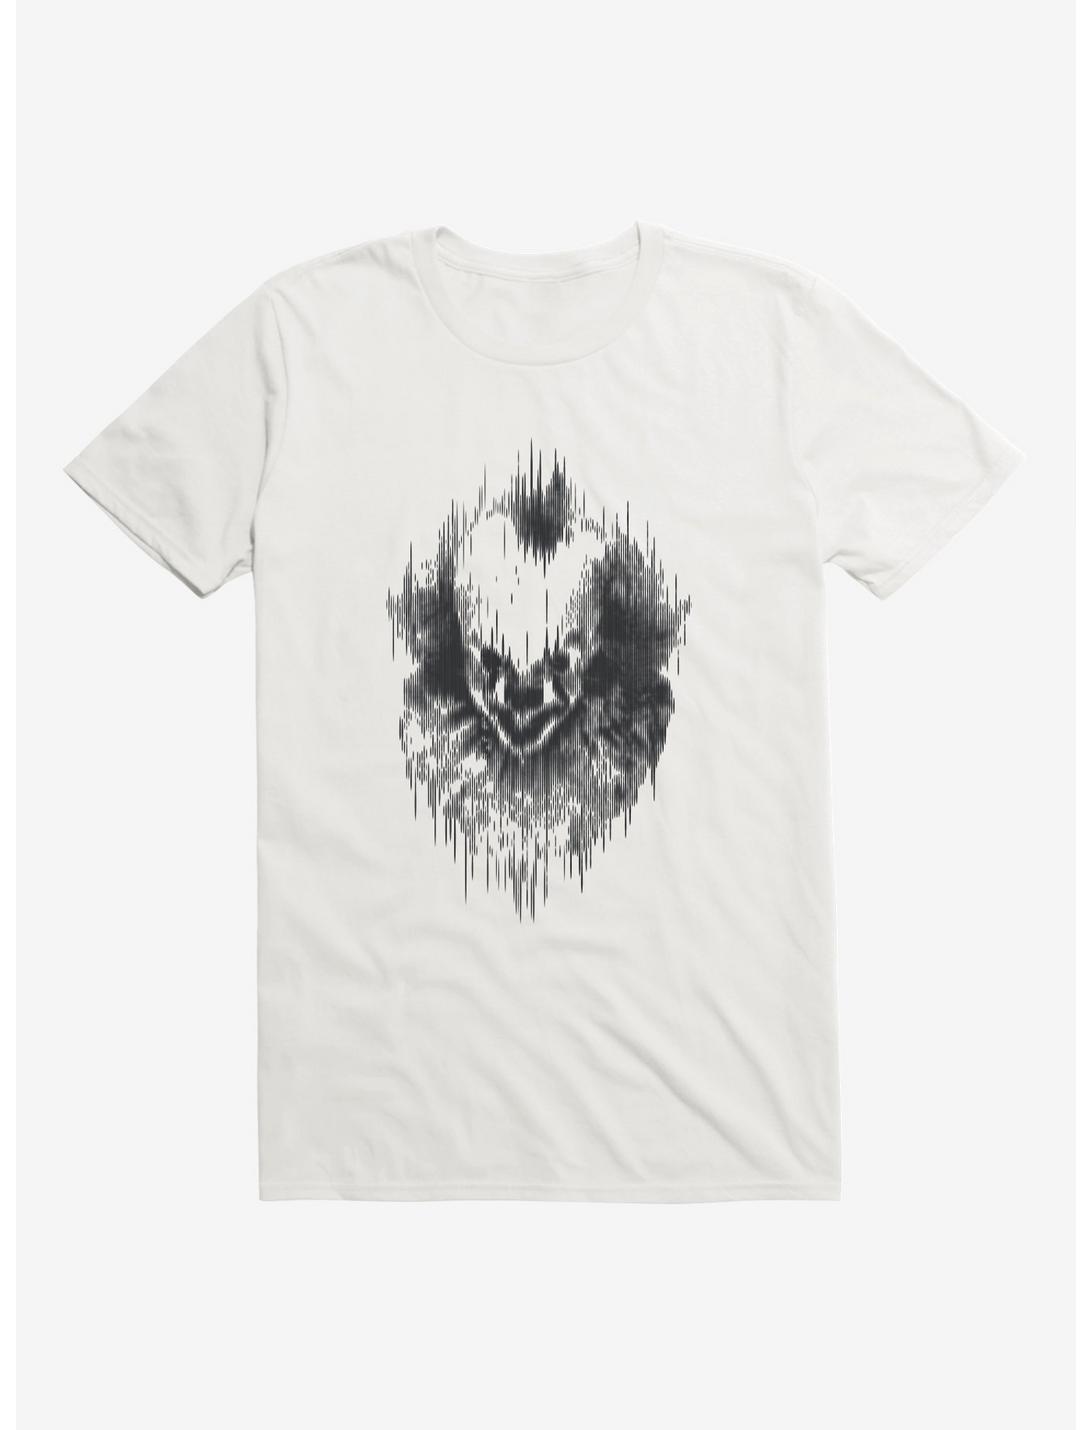 IT Chapter Two Pennywise Static Outline T-Shirt, WHITE, hi-res